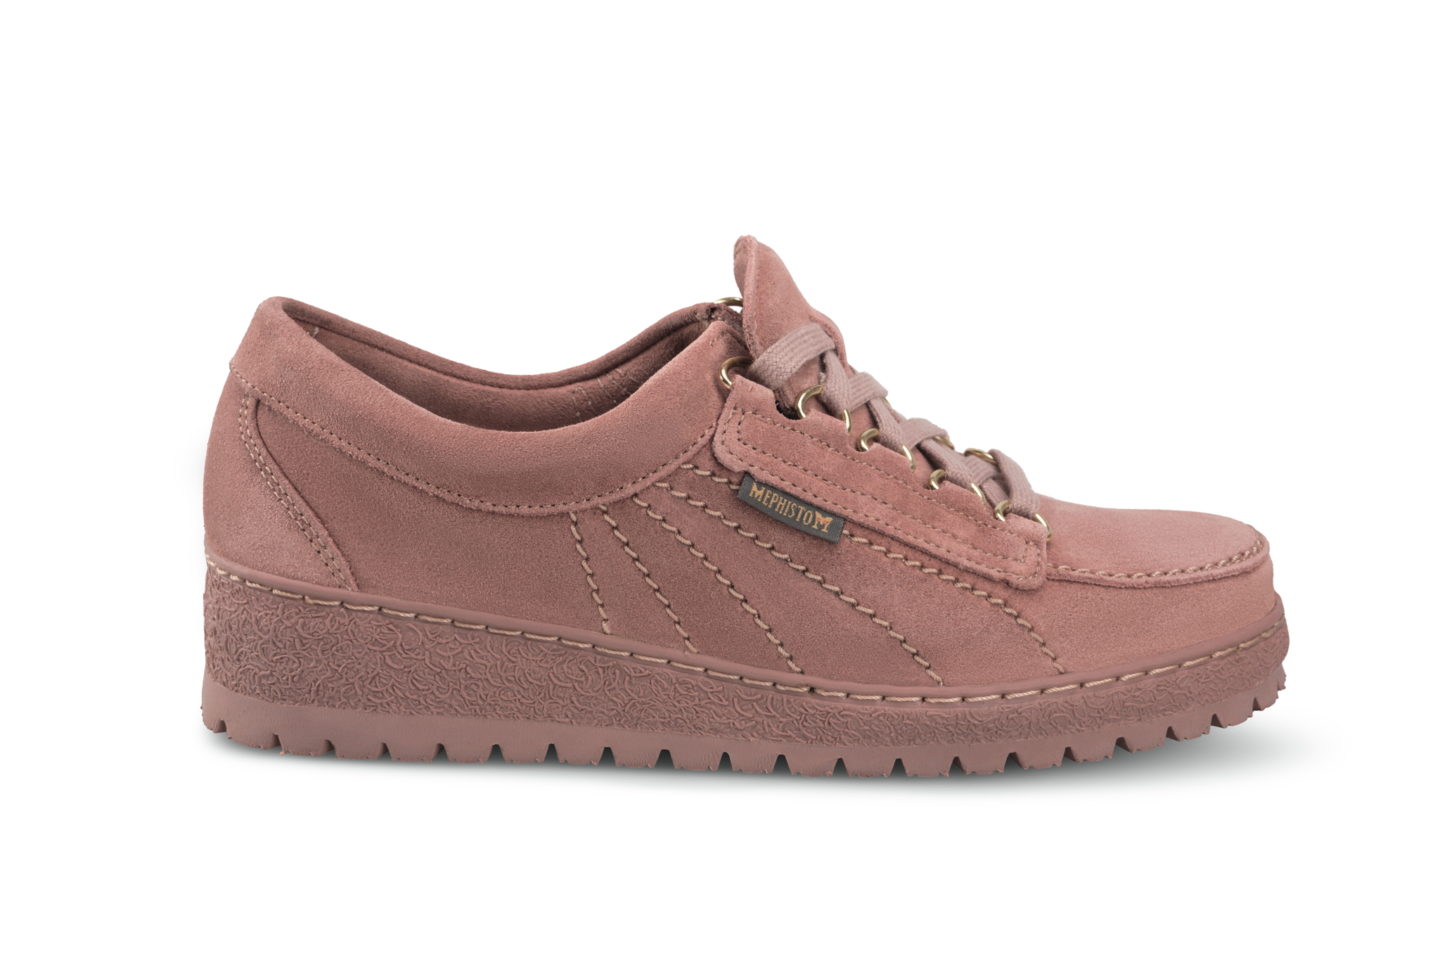 Mephisto Originals for Women | LADY Originals Available Now